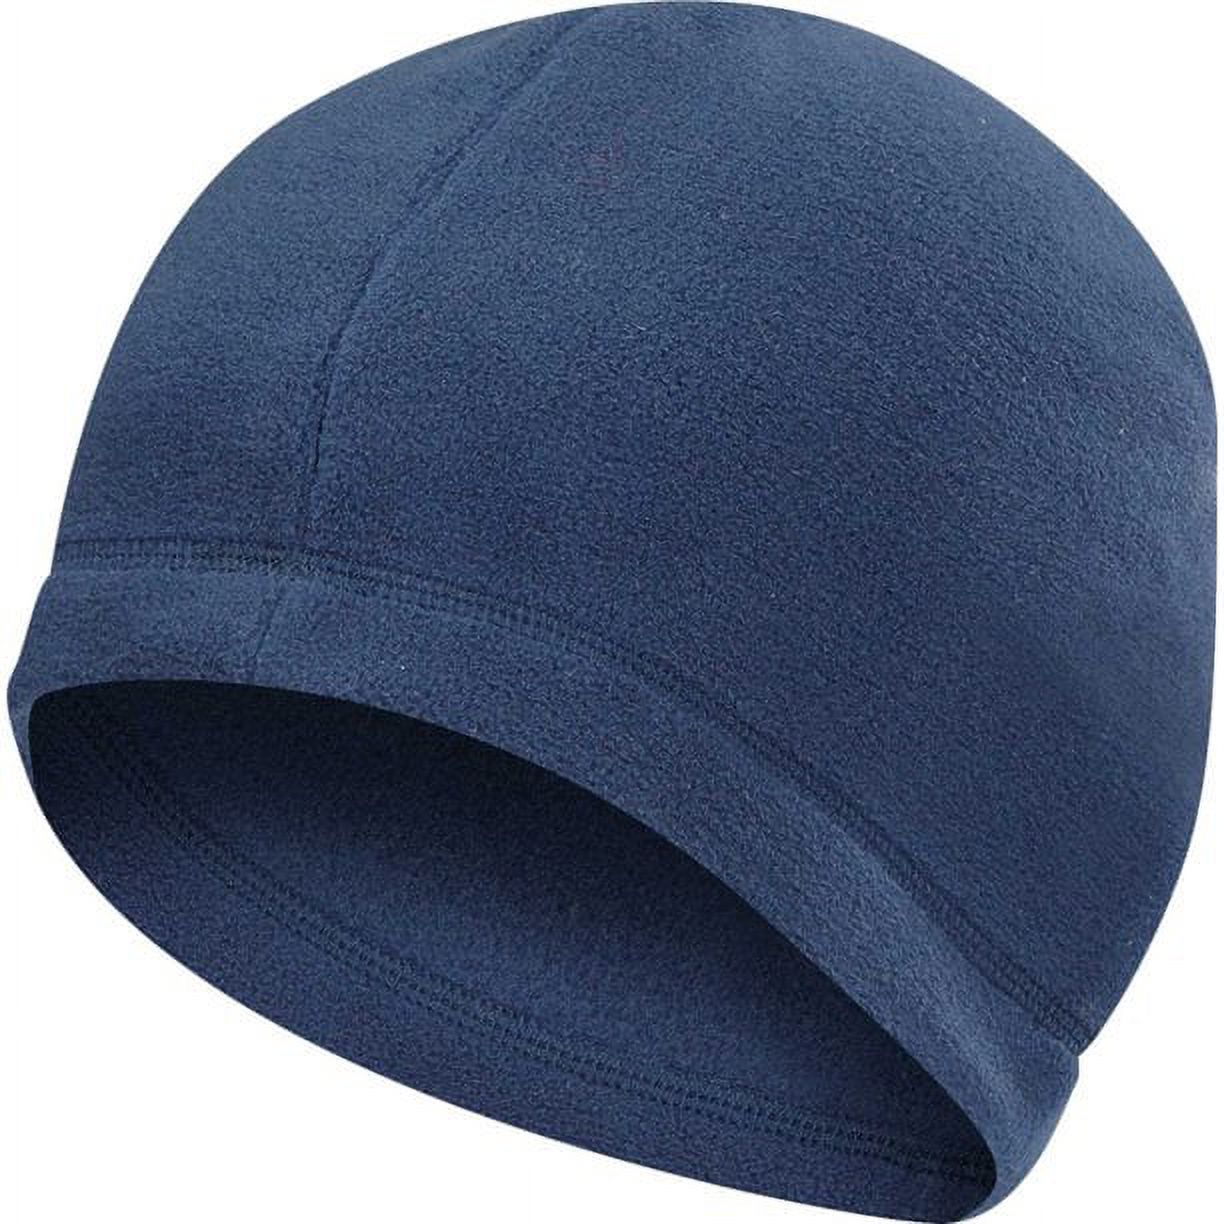 NEW Adidas Golf Climawarm Microfleece Navy Blue Beanie Hat/Cap - image 2 of 2